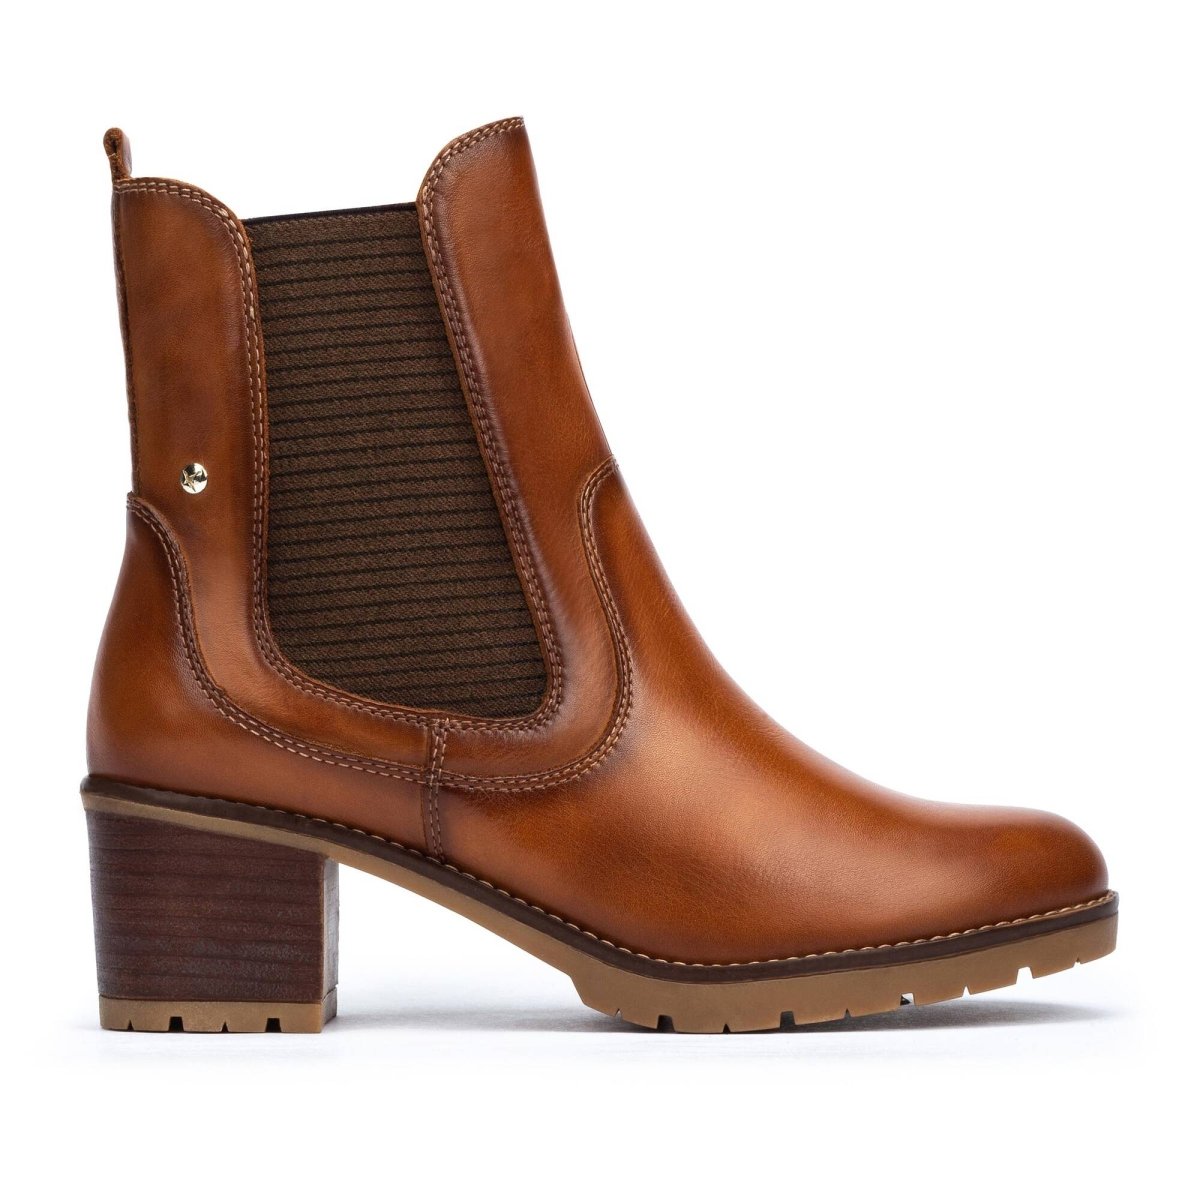 PIKOLINOS LLANES W7H-8948 WOMEN'S ANKLE BOOTS IN BRANDY - TLW Shoes